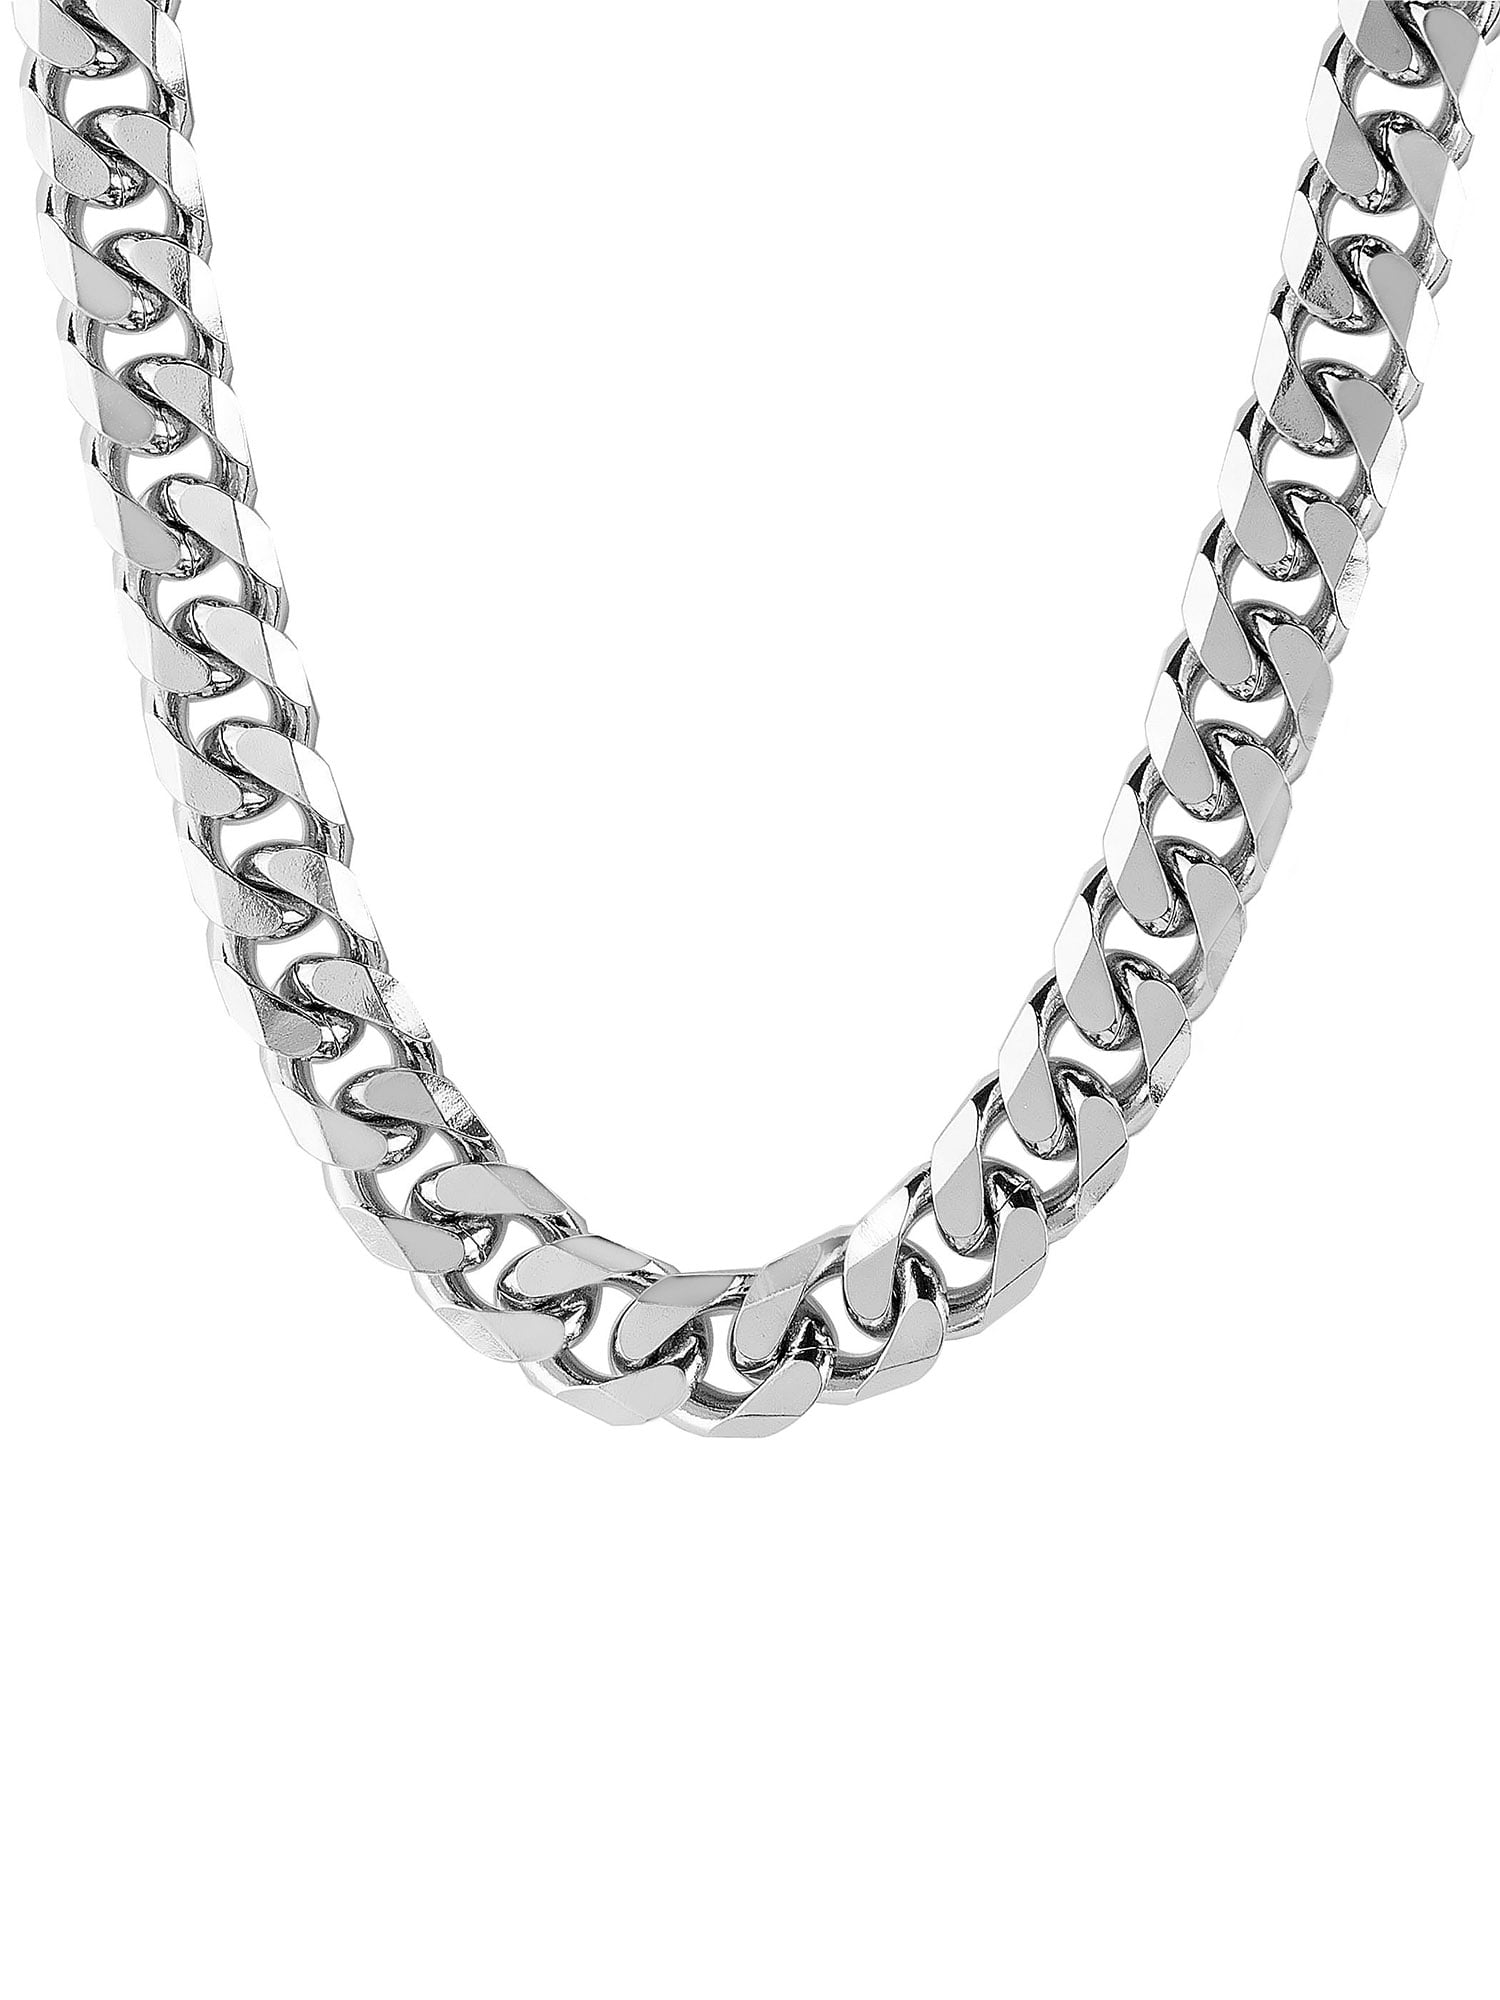 Coastal Jewelry Men's 24 Inch Stainless Steel Beveled Curb Chain Necklace  (10 mm)